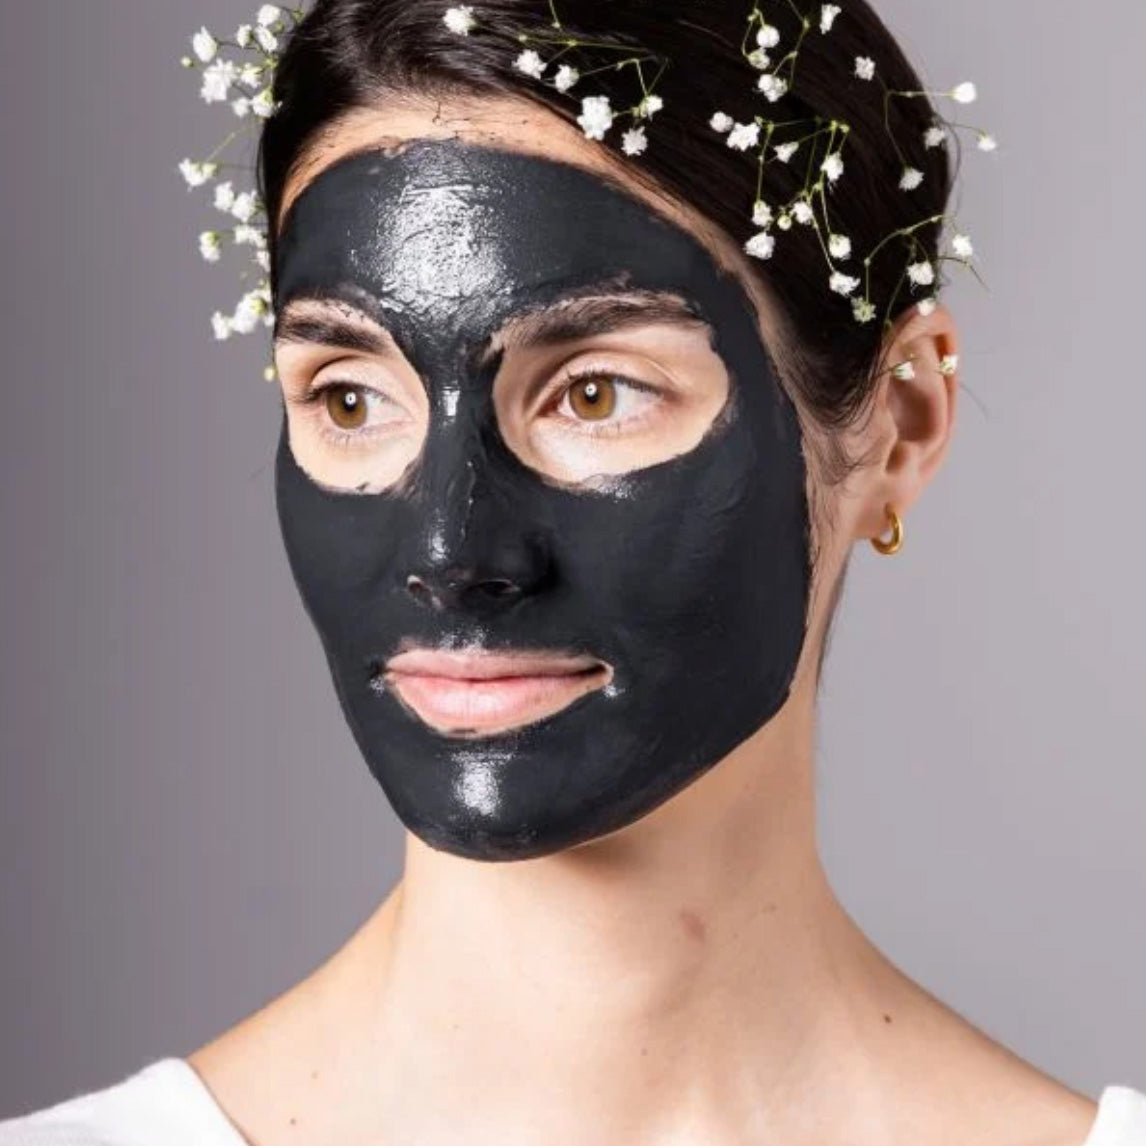 Apivita Black Face Mask Propolis features sebum control, antiseptic, and antibacterial action from propolis, immortelle, lemon, and tea tree essential oils.